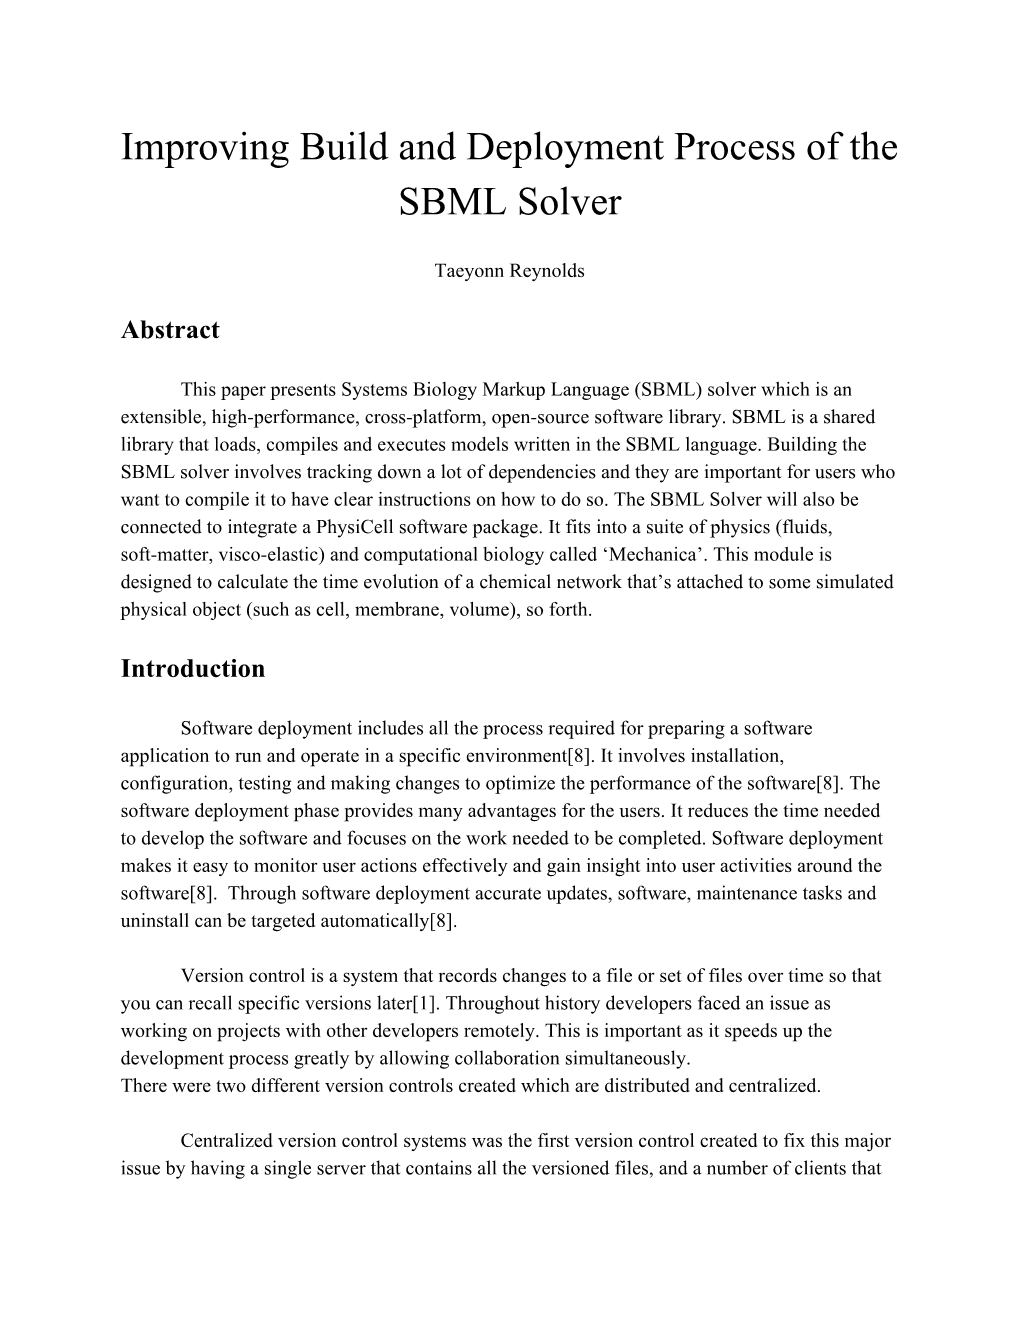 Improving Build and Deployment Process of the SBML Solver